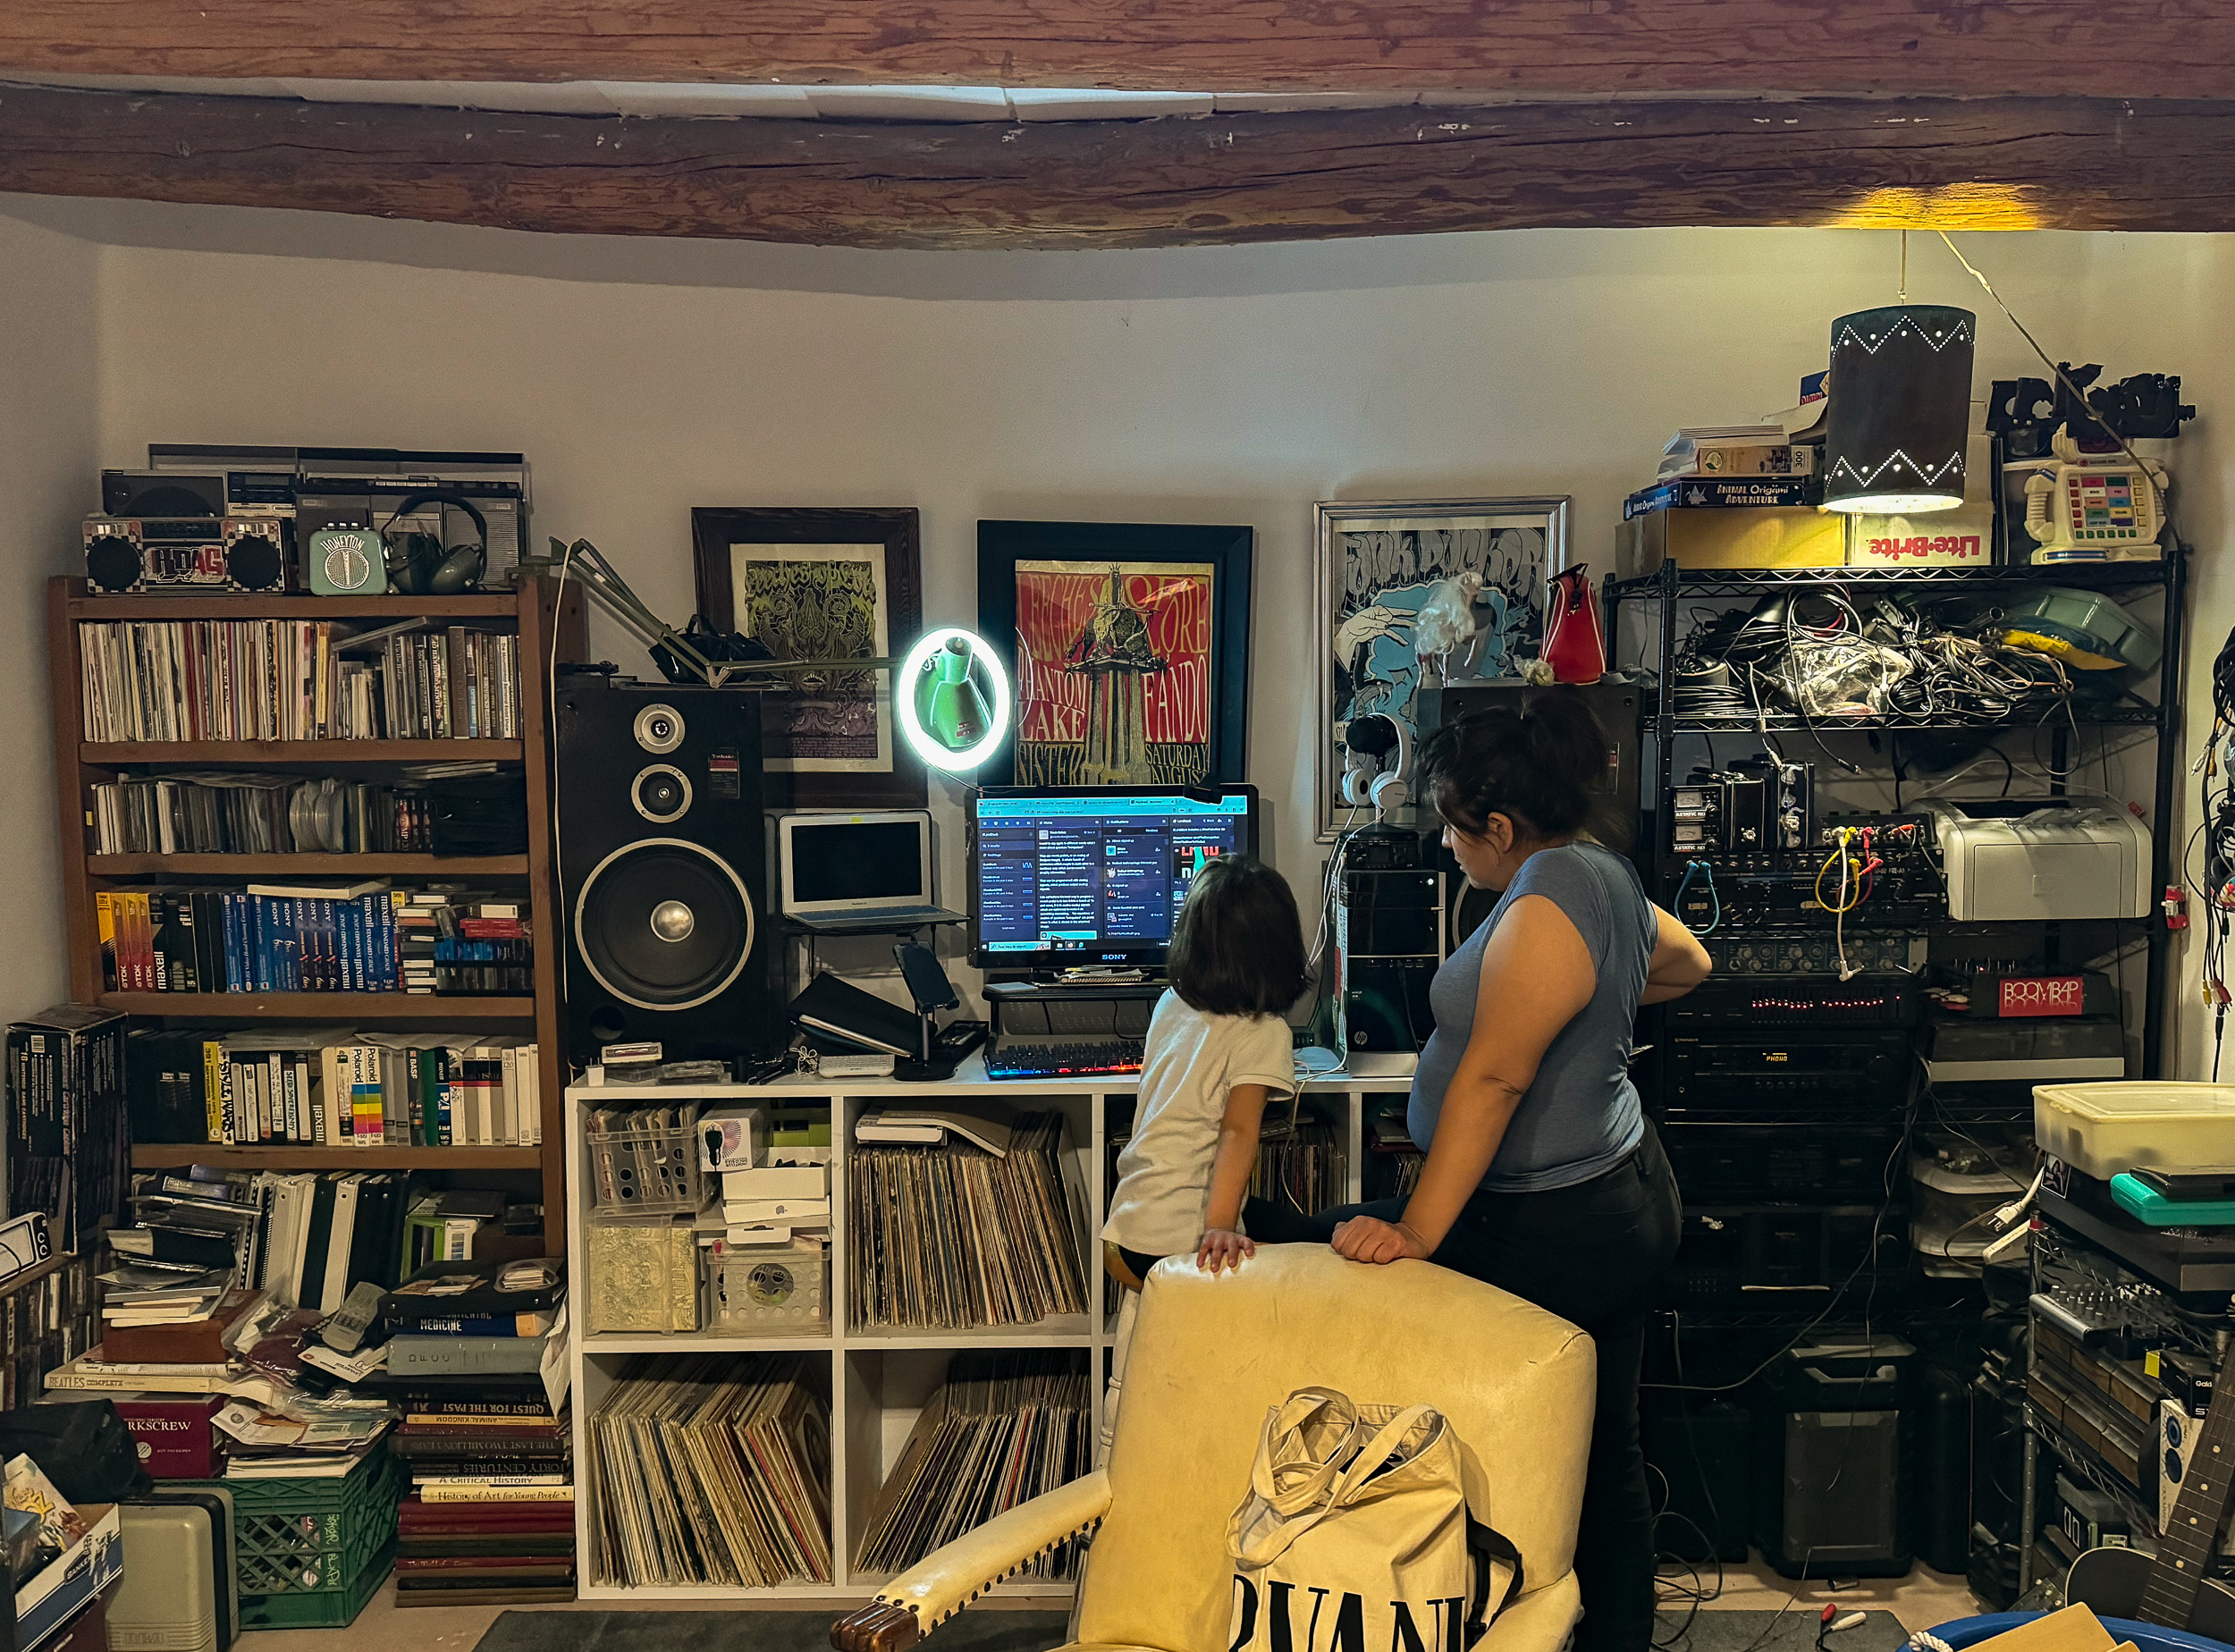 Woman and child look at computer in front of recording equipment.